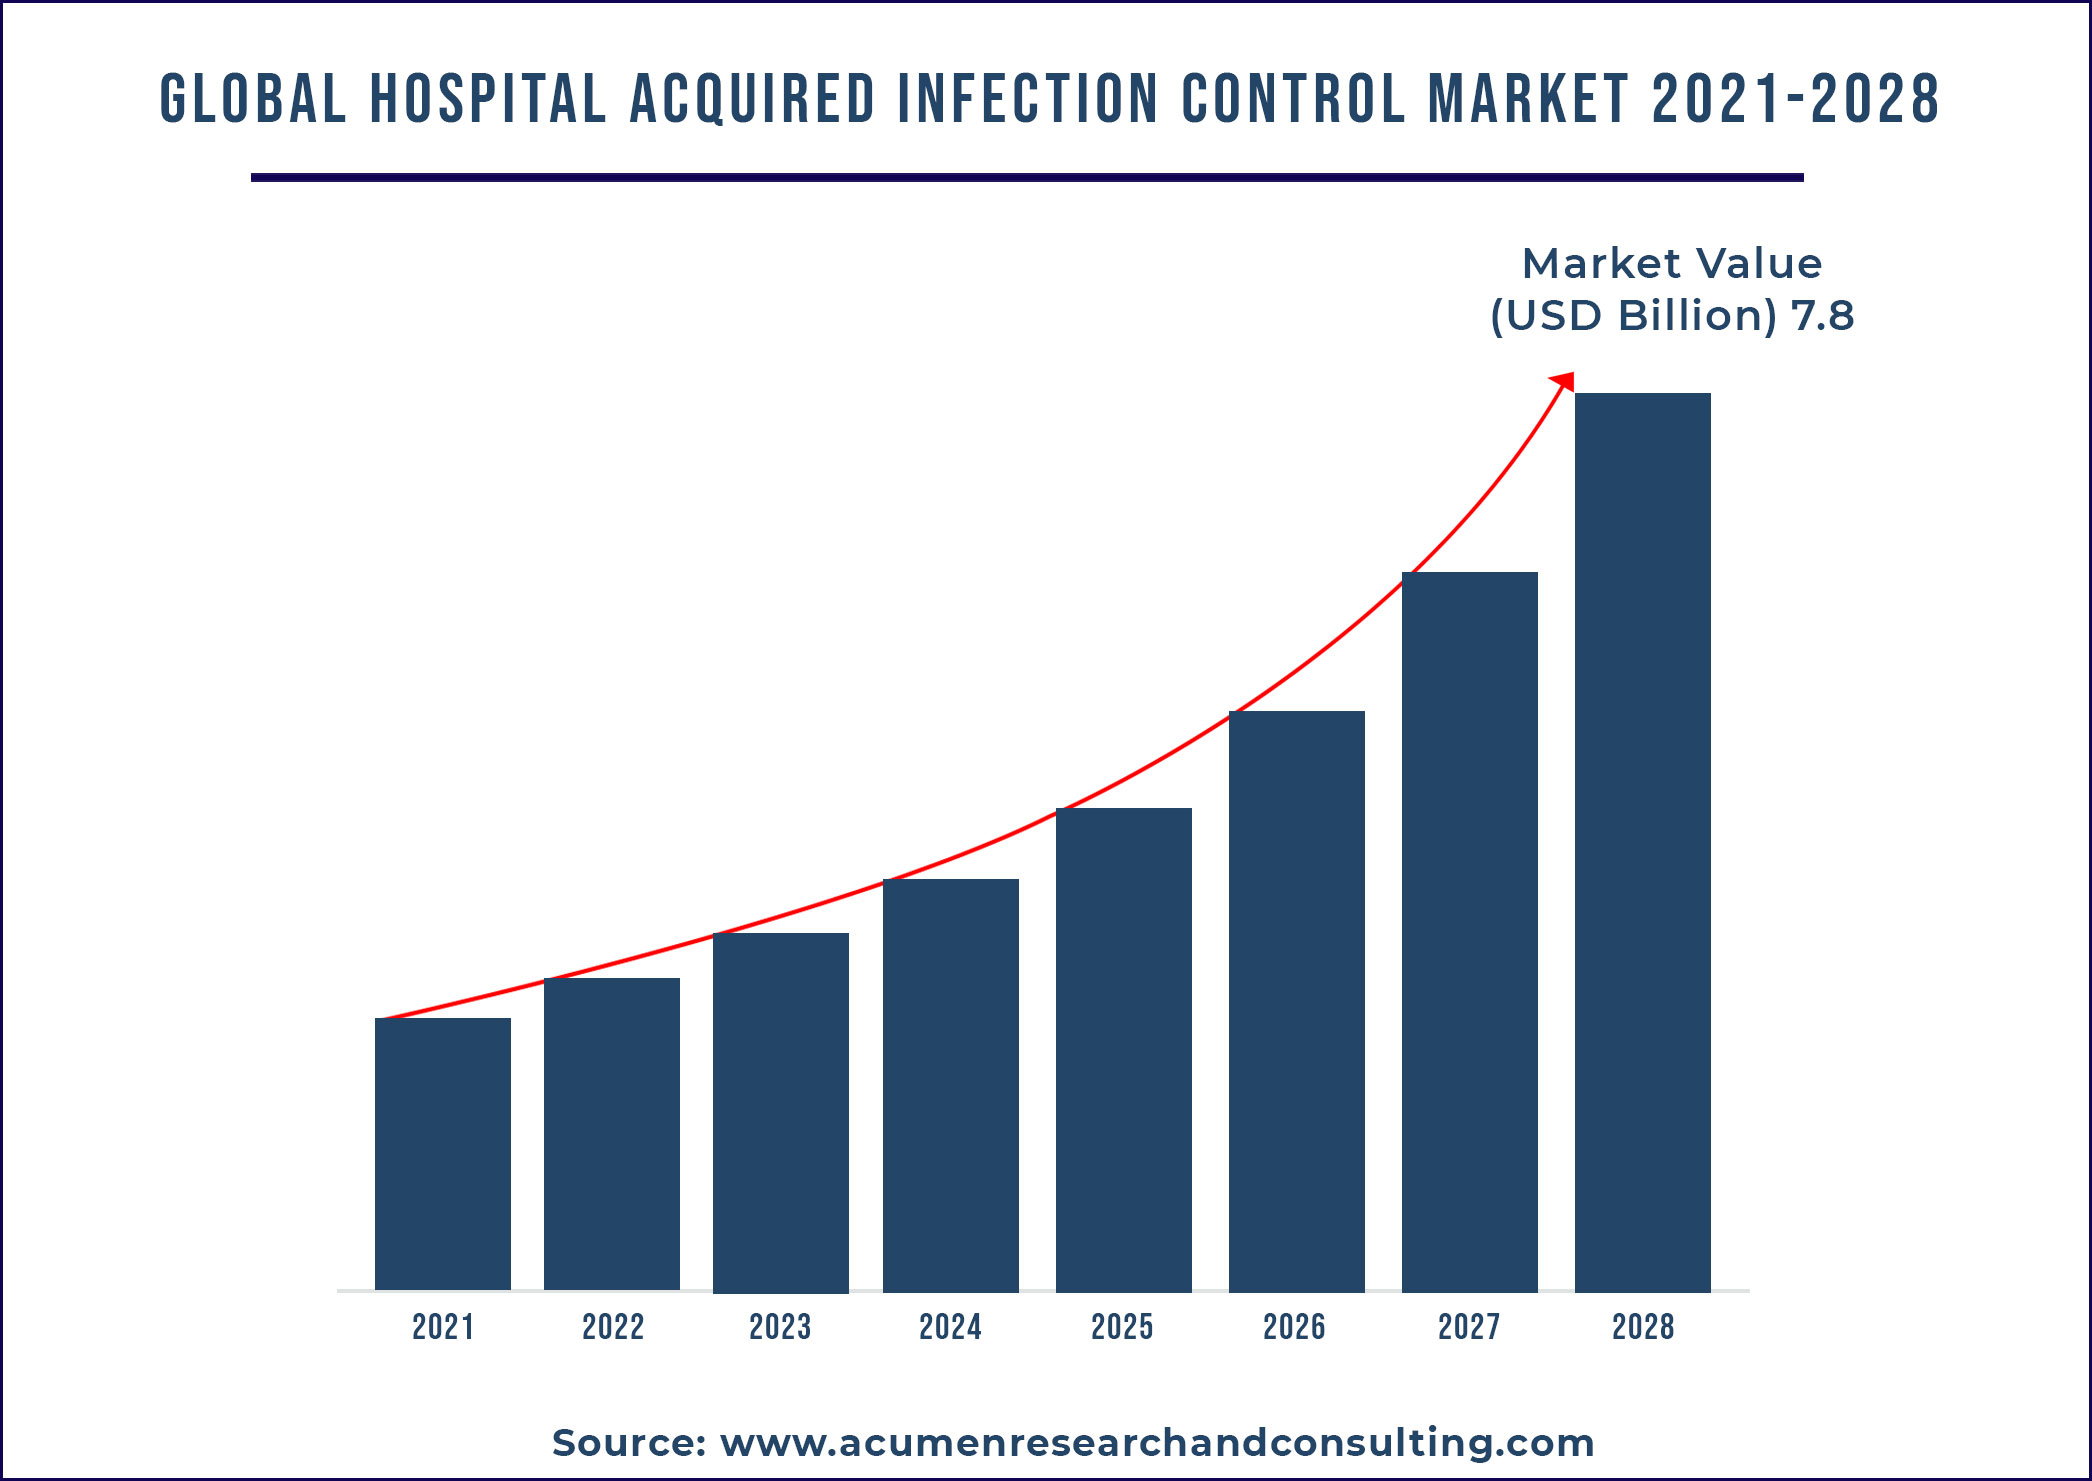 Hospital Acquired Infection Control Market Size 2021-2028